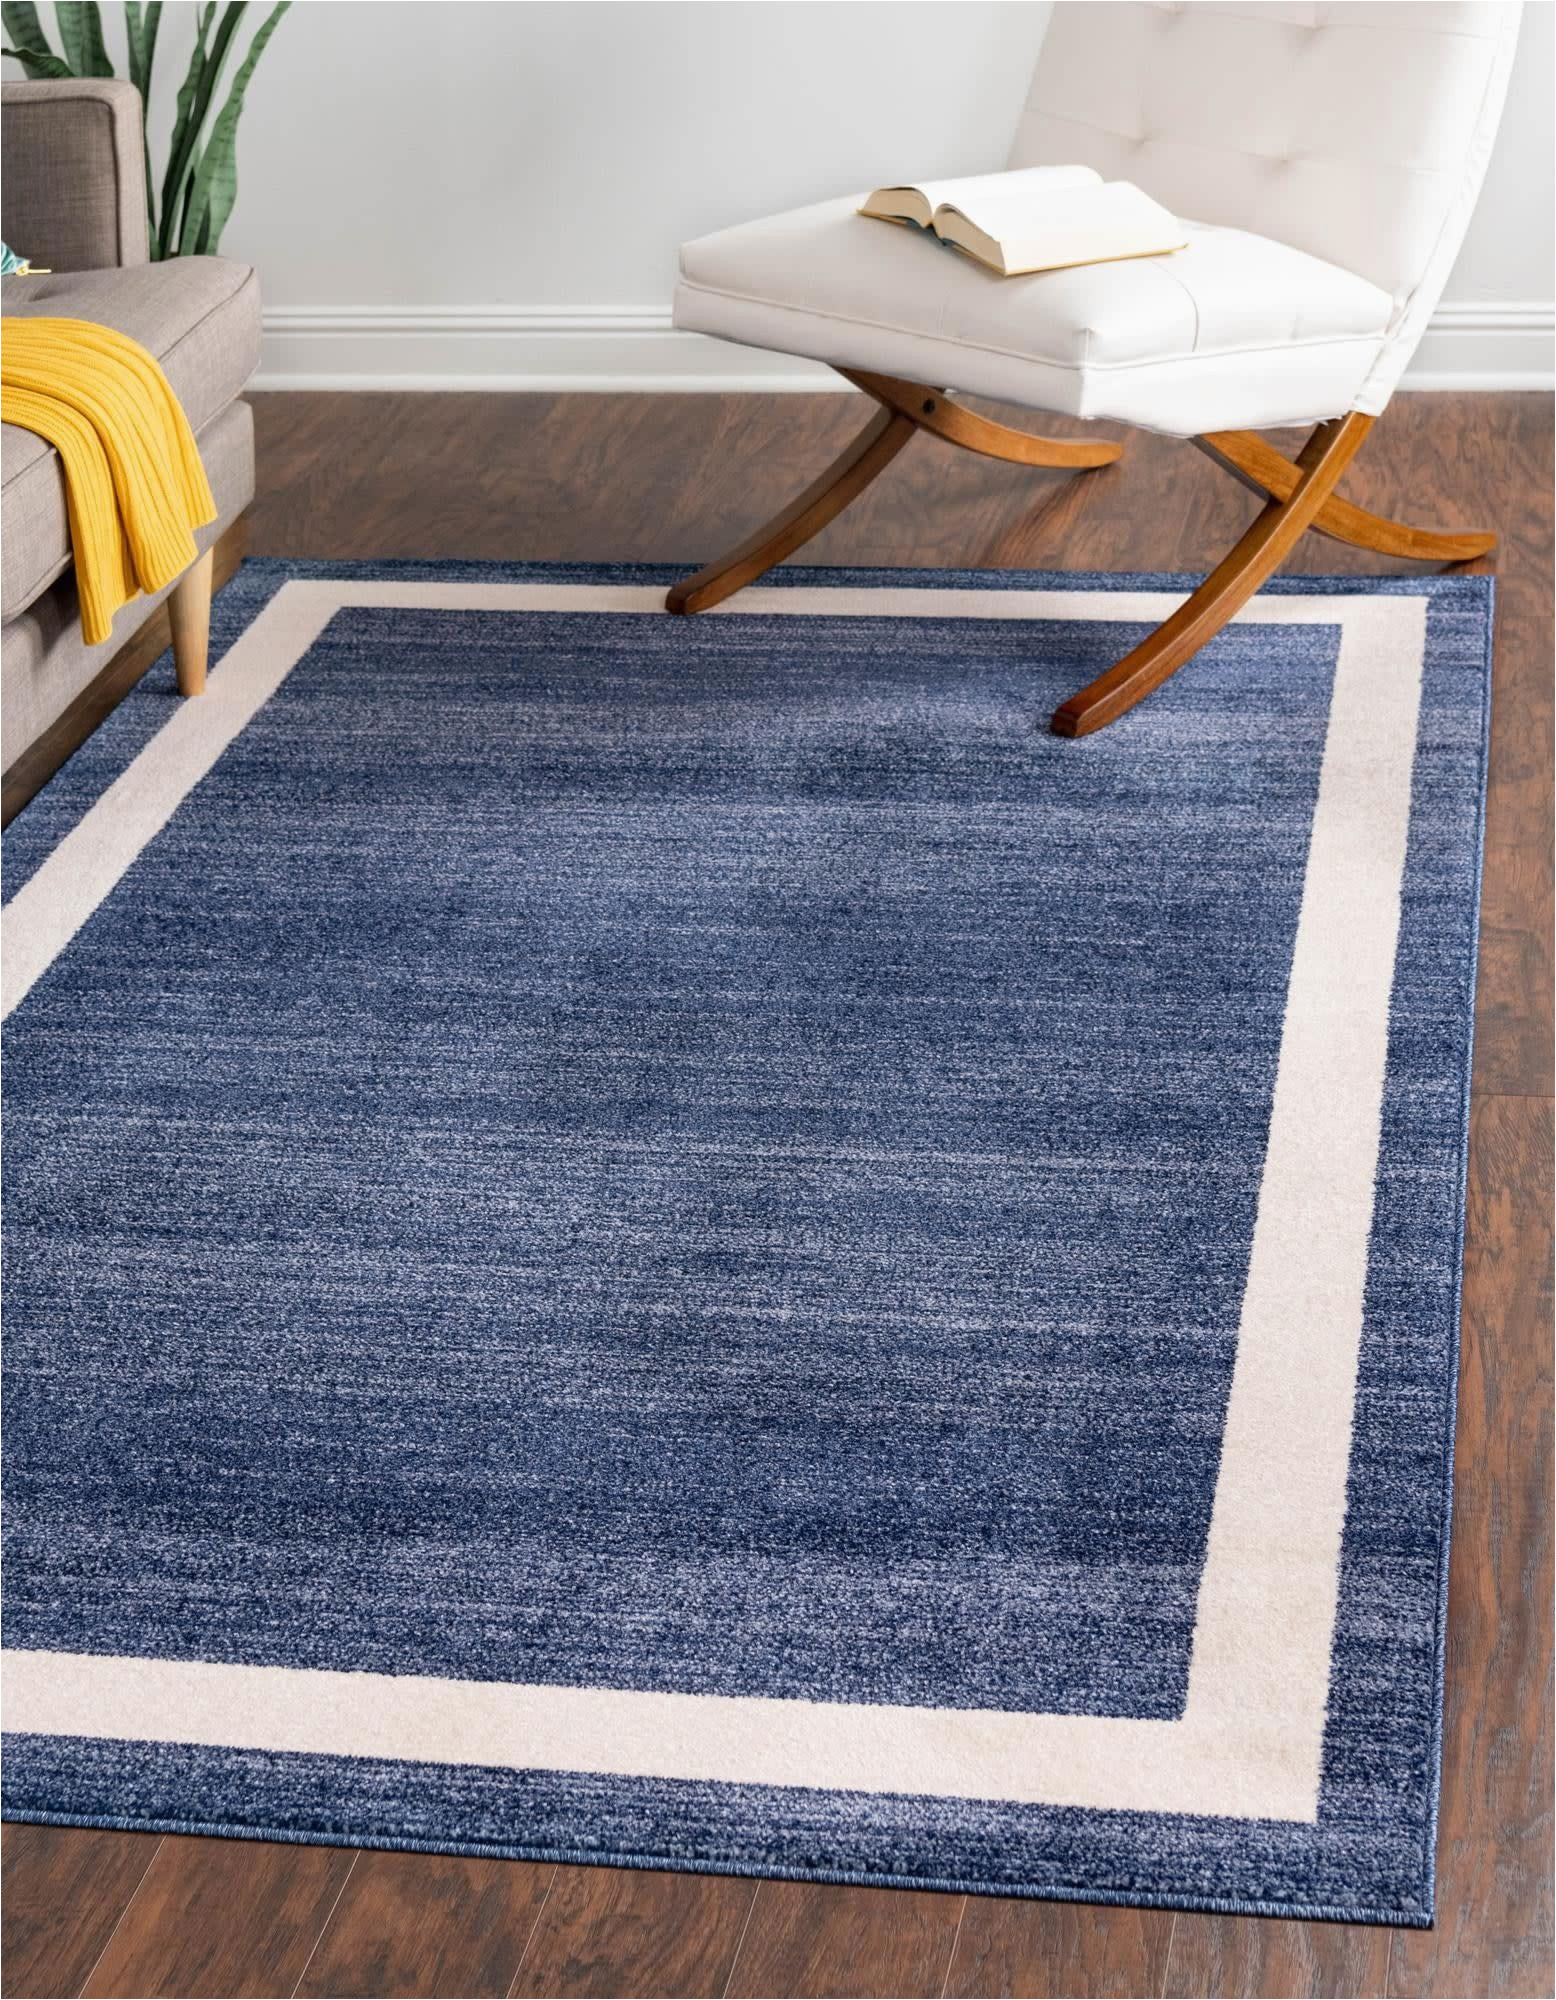 Navy Blue and Ivory area Rug Unique Loom Del Mar Collection area Rug-transitional Inspired with Modern Contemporary Design, Rectangular 3′ 3″ X 5′ 3″, Navy Blue/ivory